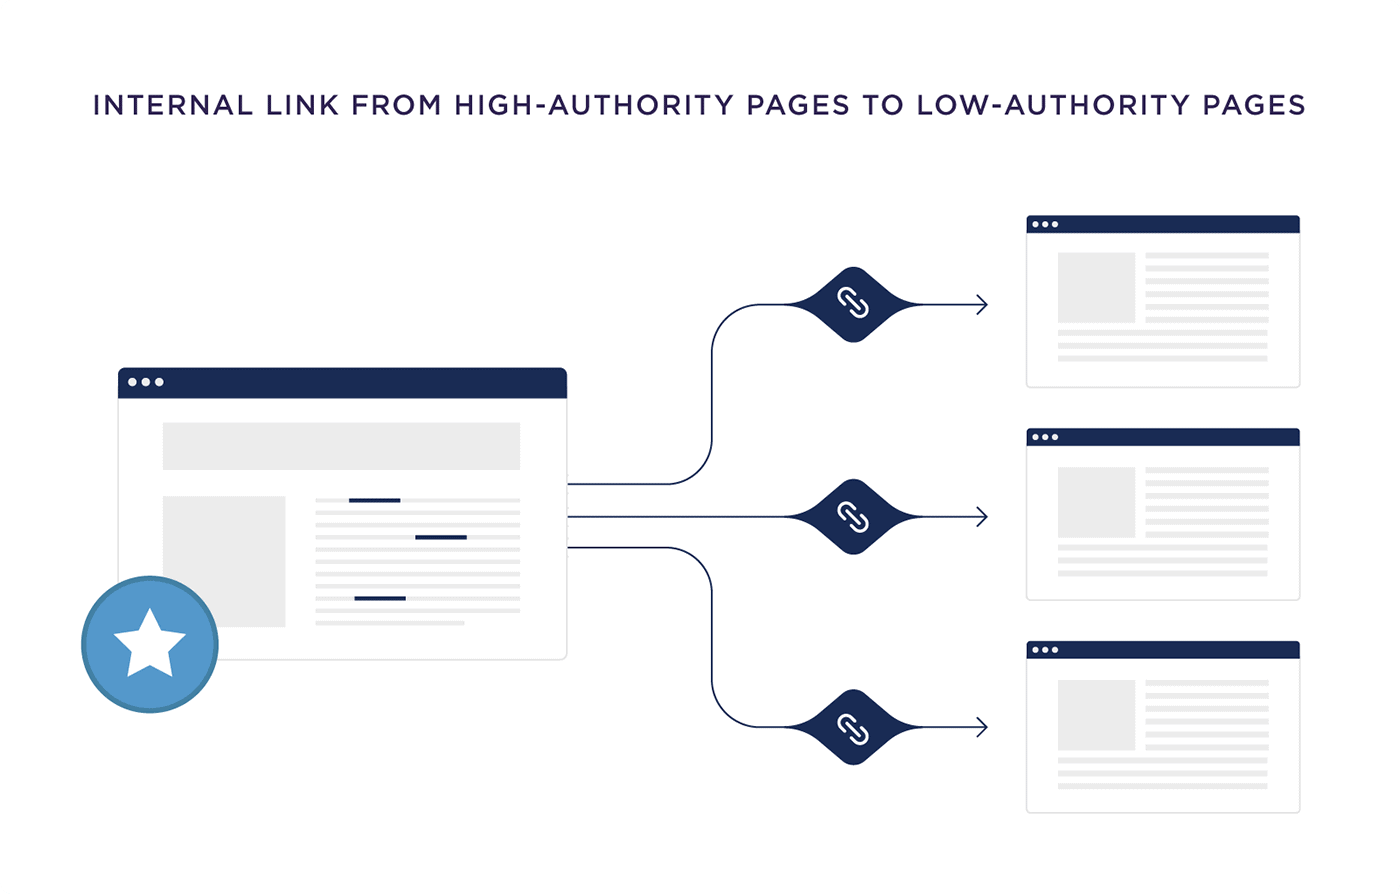 Internal link from high-authority pages to low-authority pages